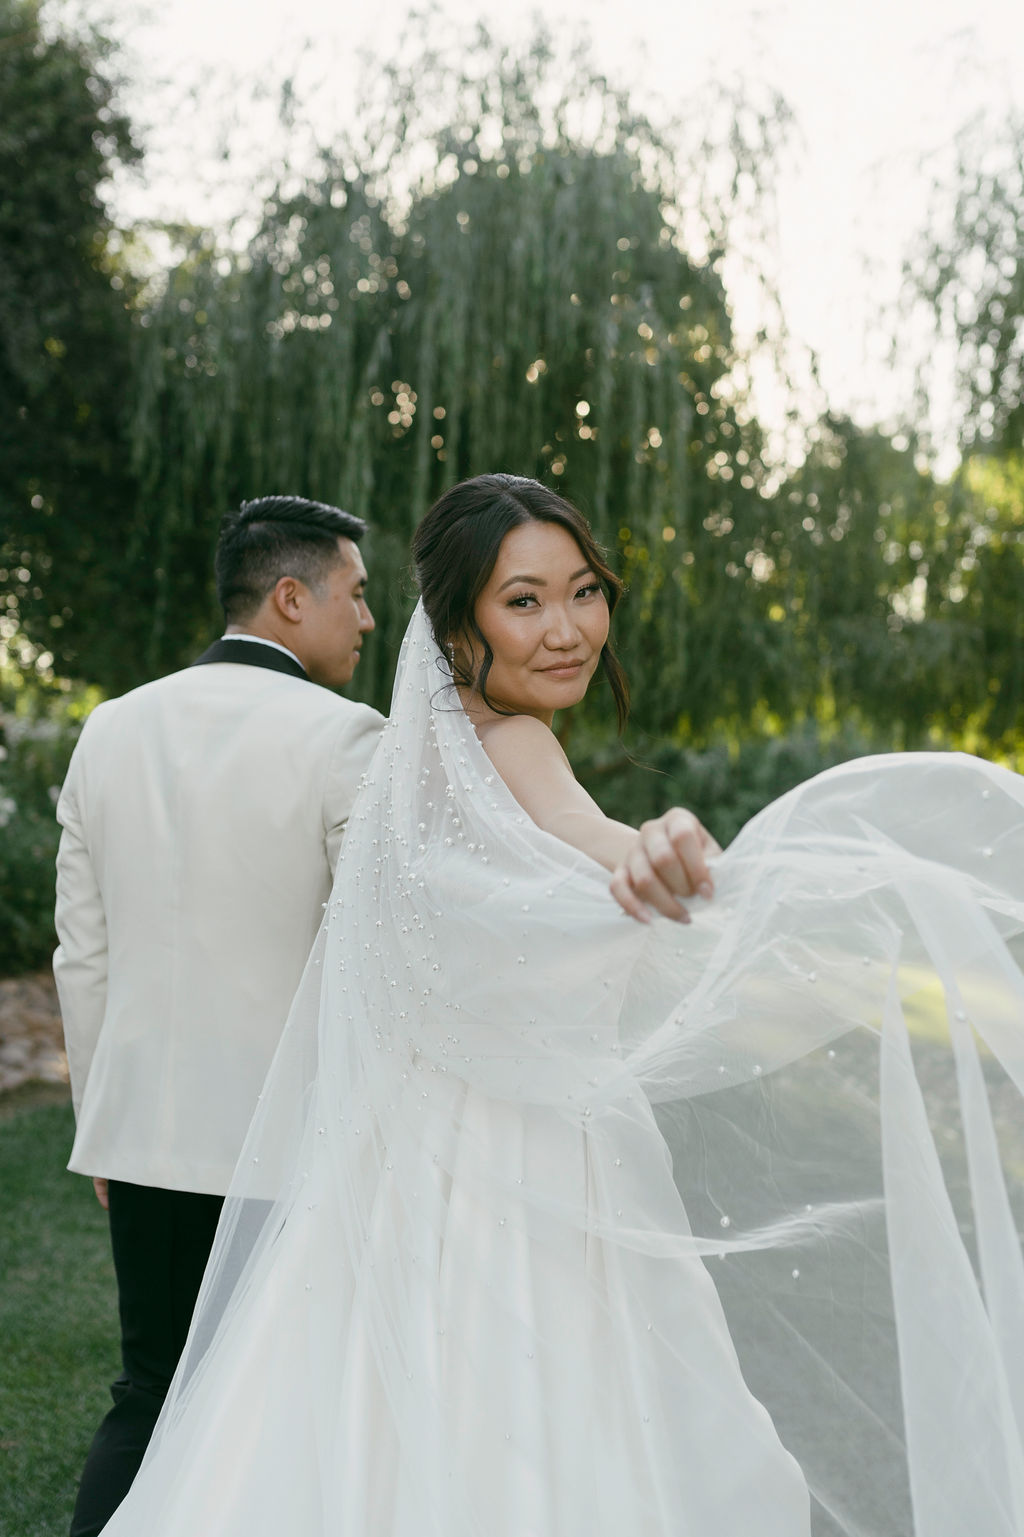 bride and groom posing for their outdoor wedding portraits in california.